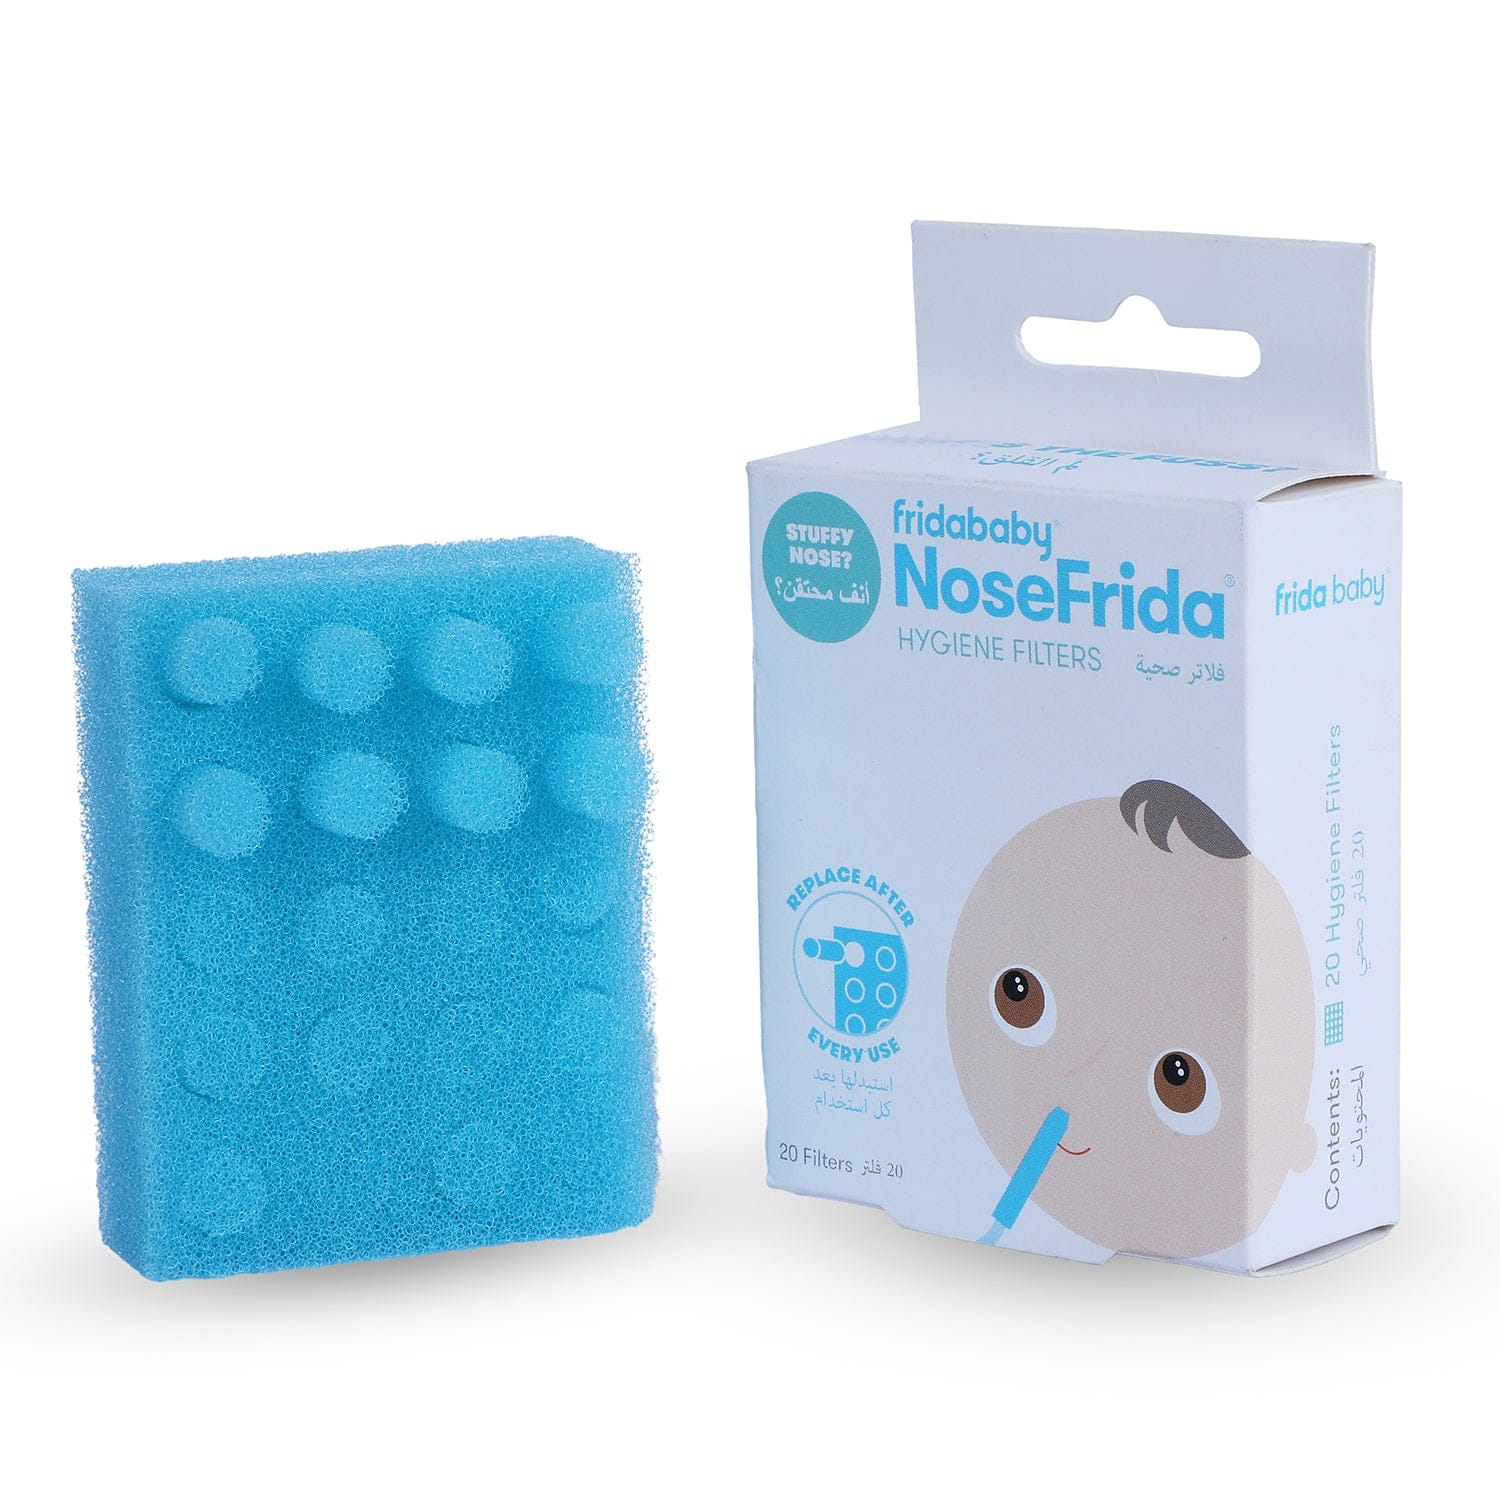 FridaBaby Nosefrida Hygiene Filters For Stuffy Nose - 20 filters - Baby Moo